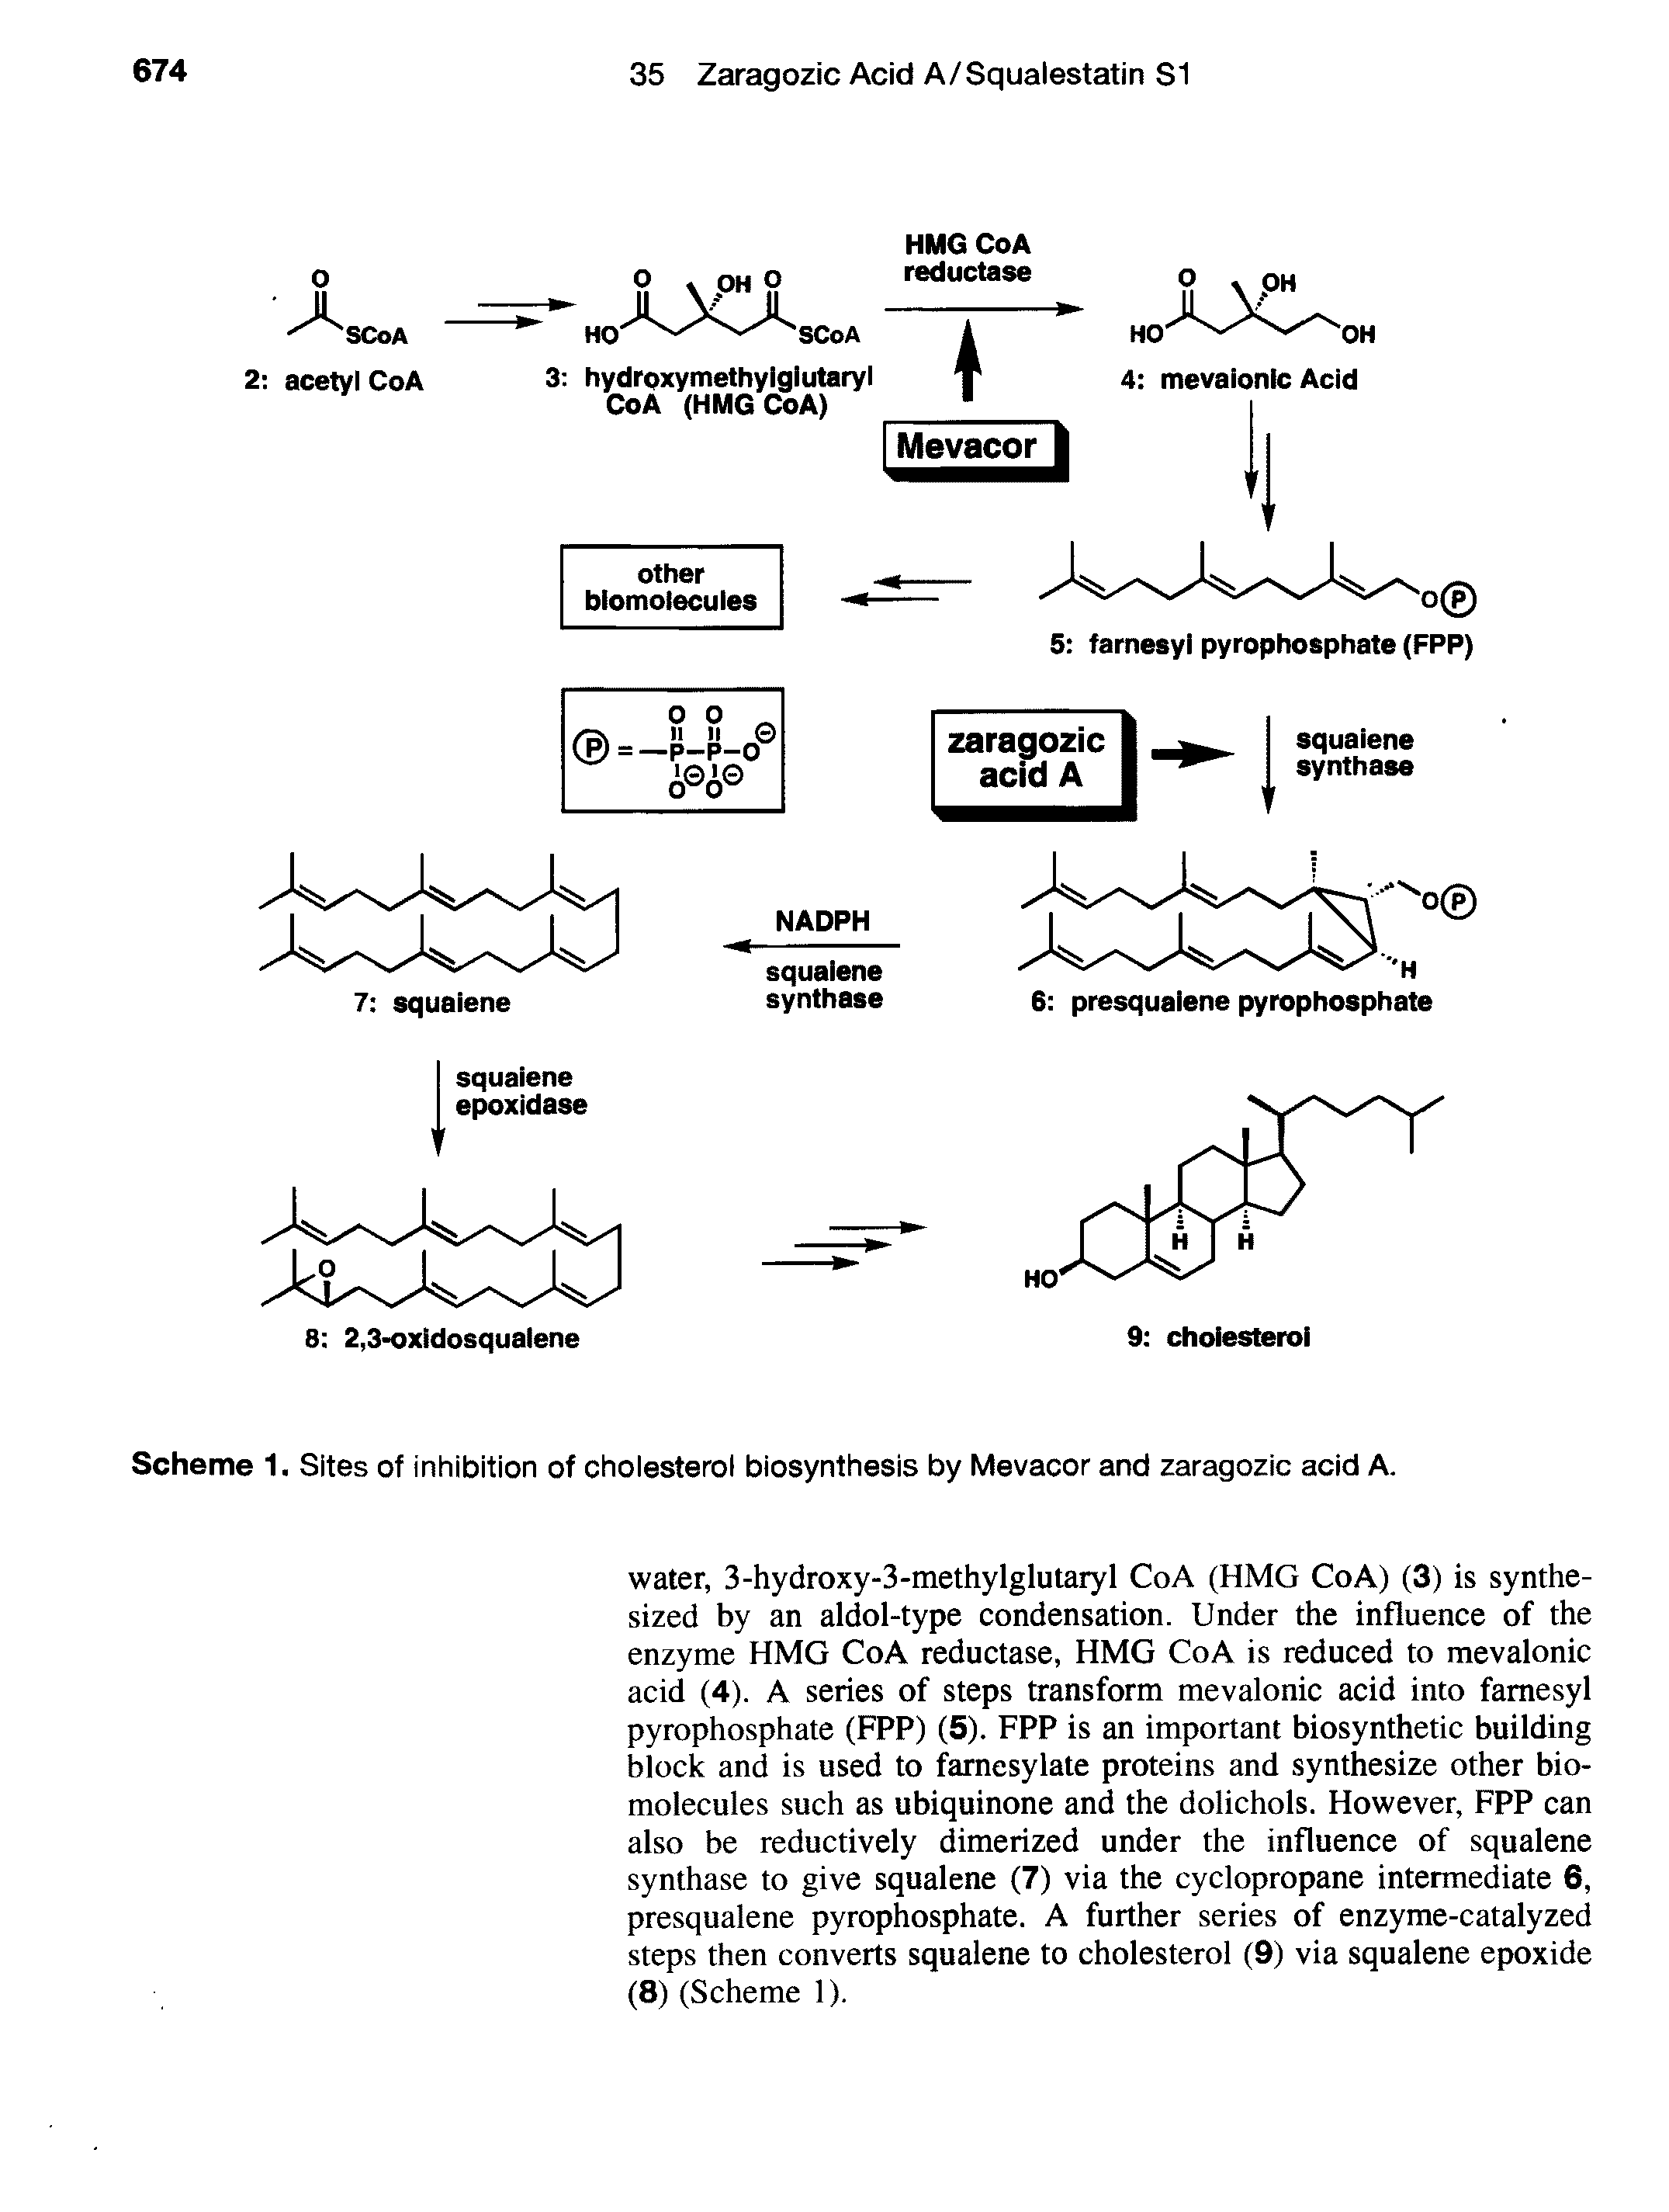 Scheme 1. Sites of inhibition of cholesterol biosynthesis by Mevacor and zaragozic acid A.